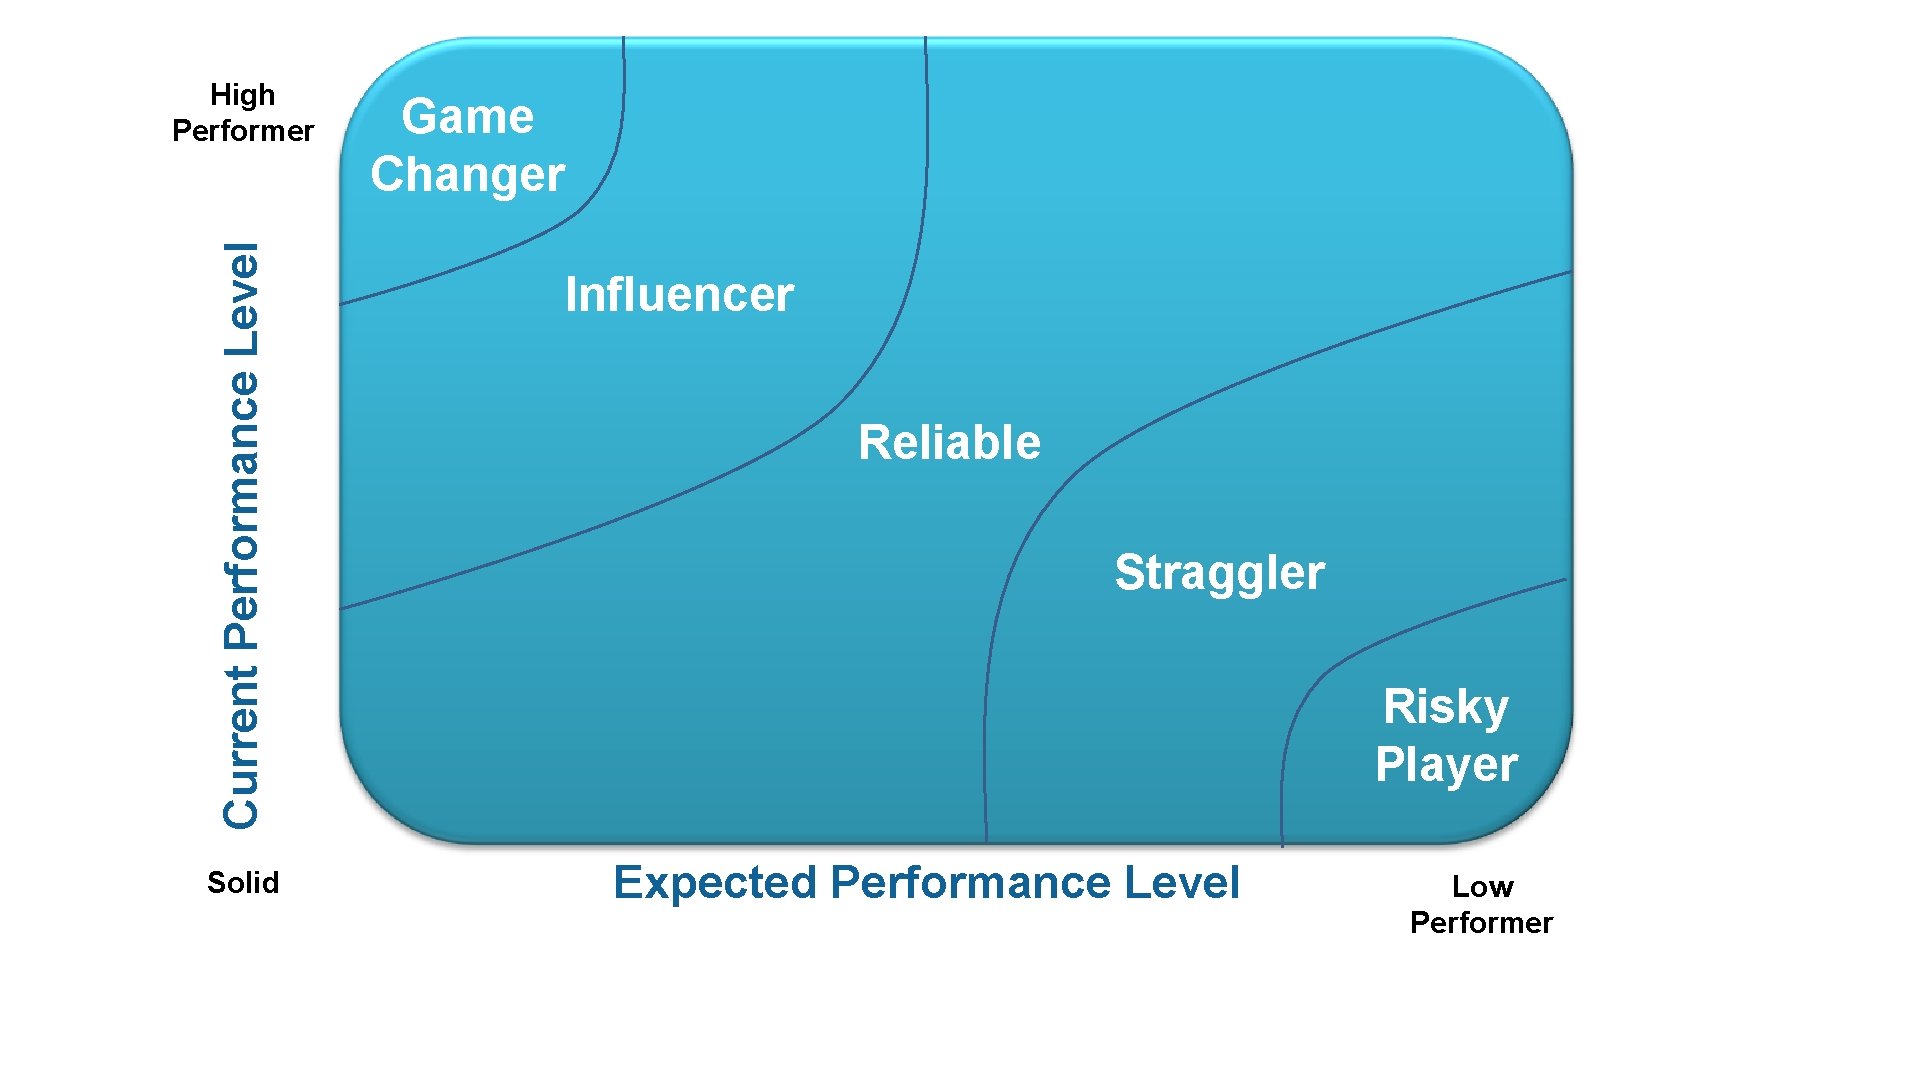 Current Performance Level High Performer Solid Game Changer Influencer Reliable Straggler Risky Player Expected